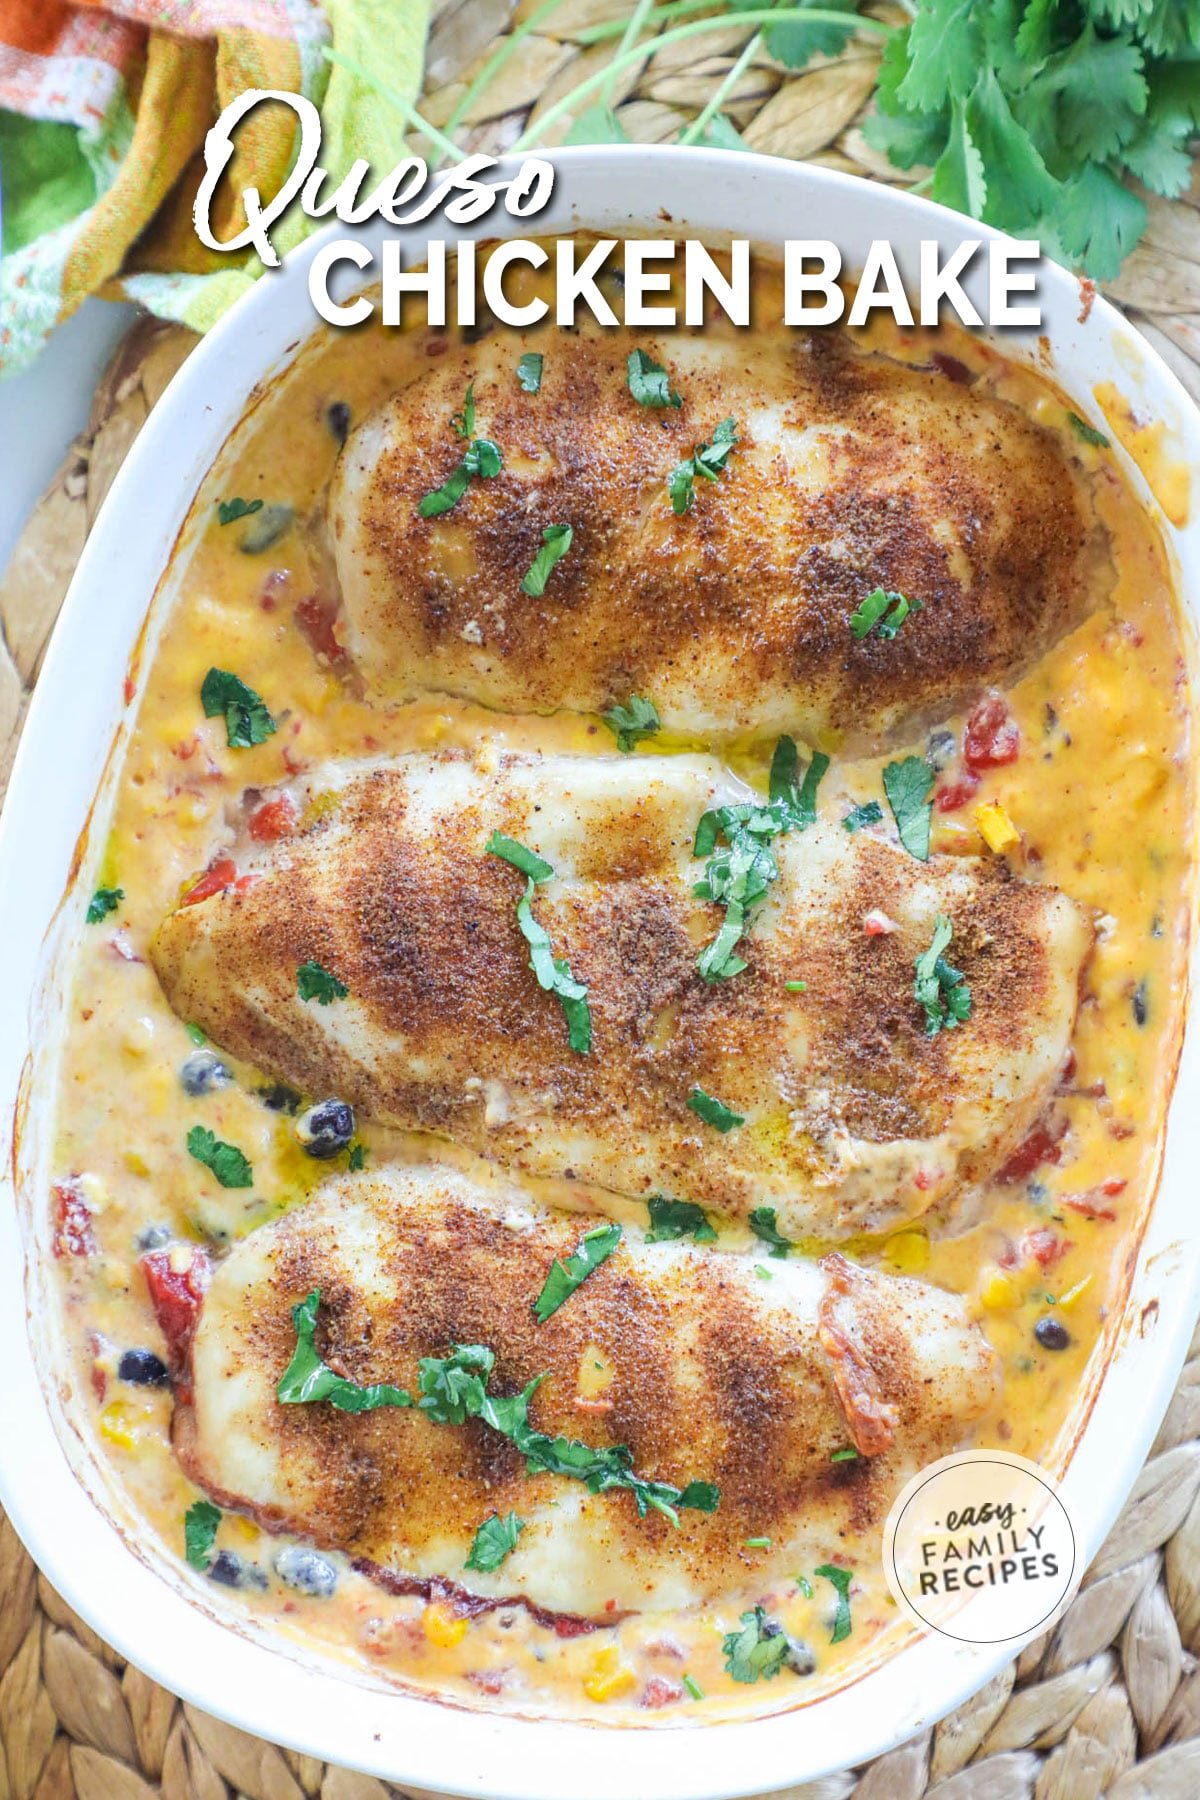 a pan of gooey, baked queso chicken